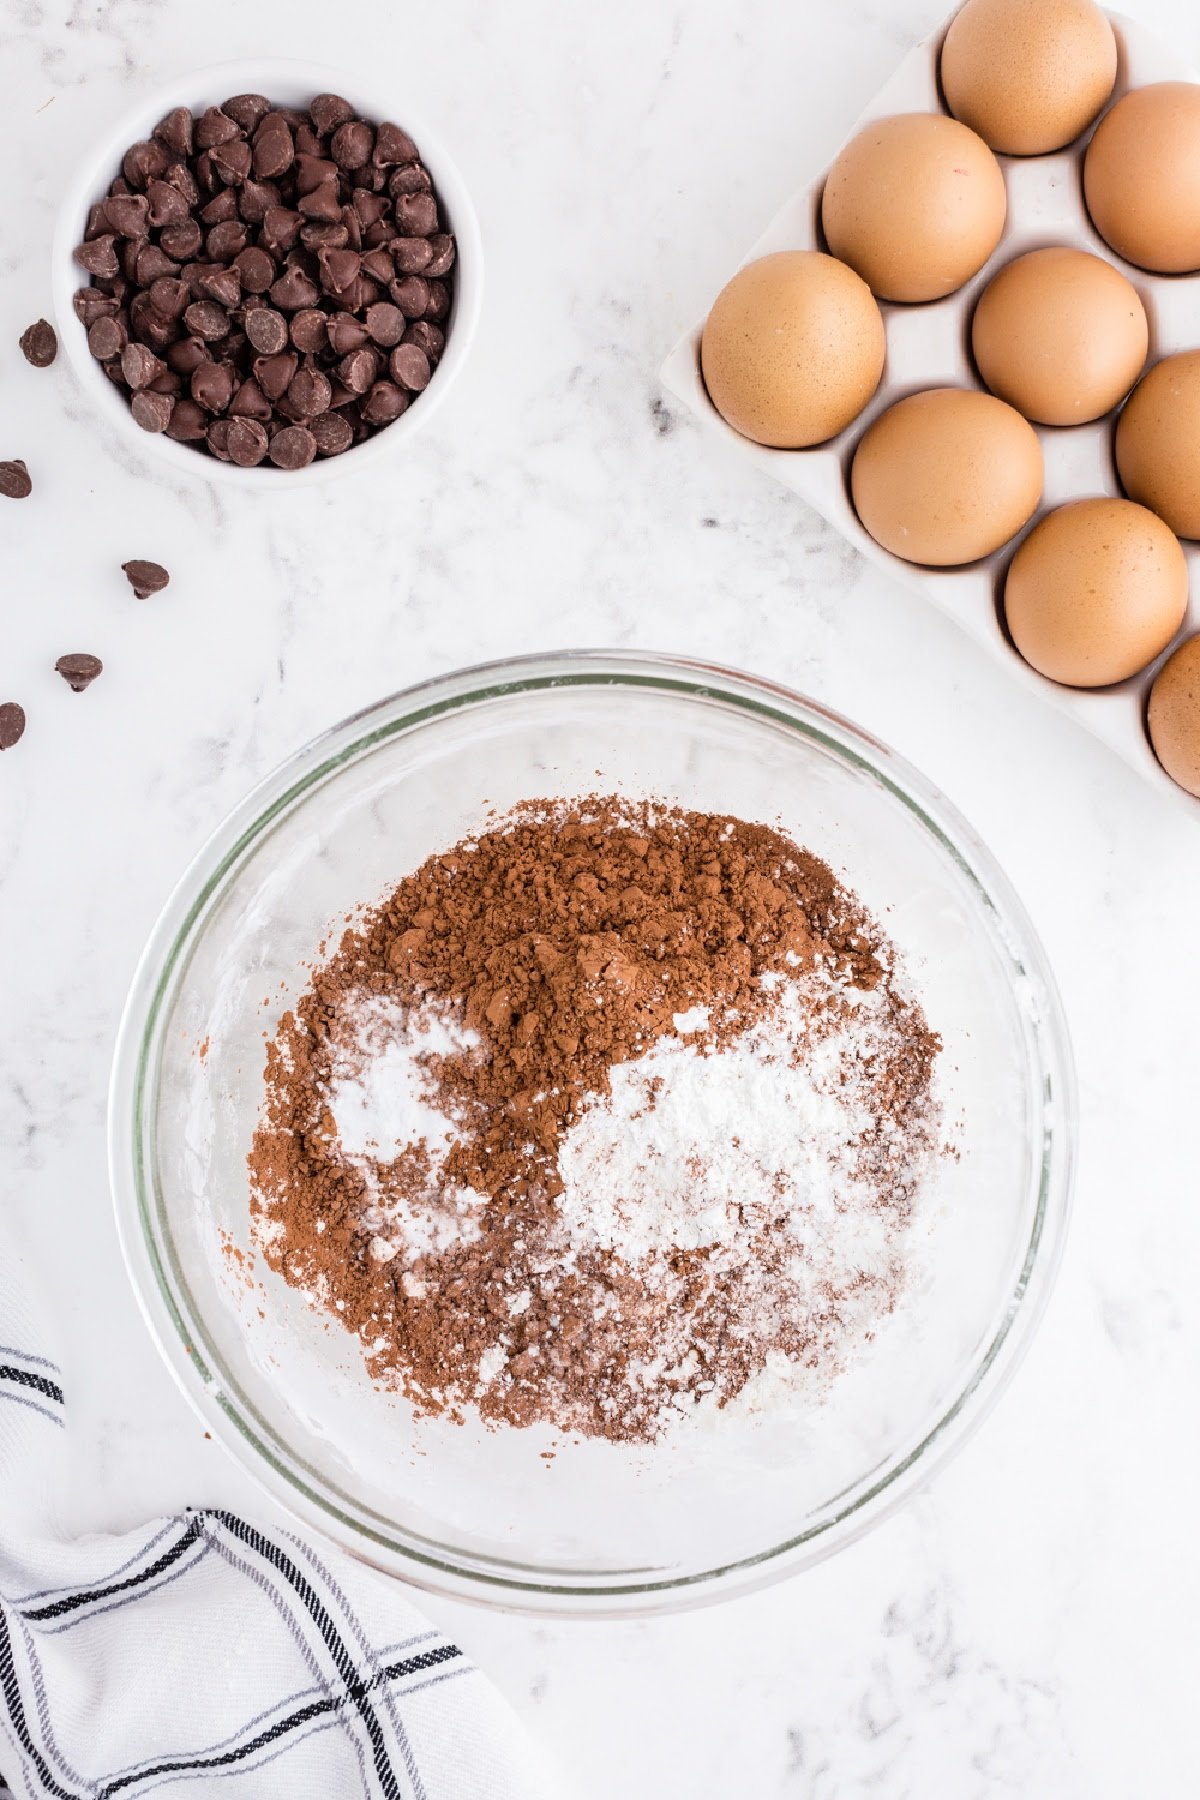 Flour and cocoa powder in a mixing bowl with eggs and chocolate chips nearby.